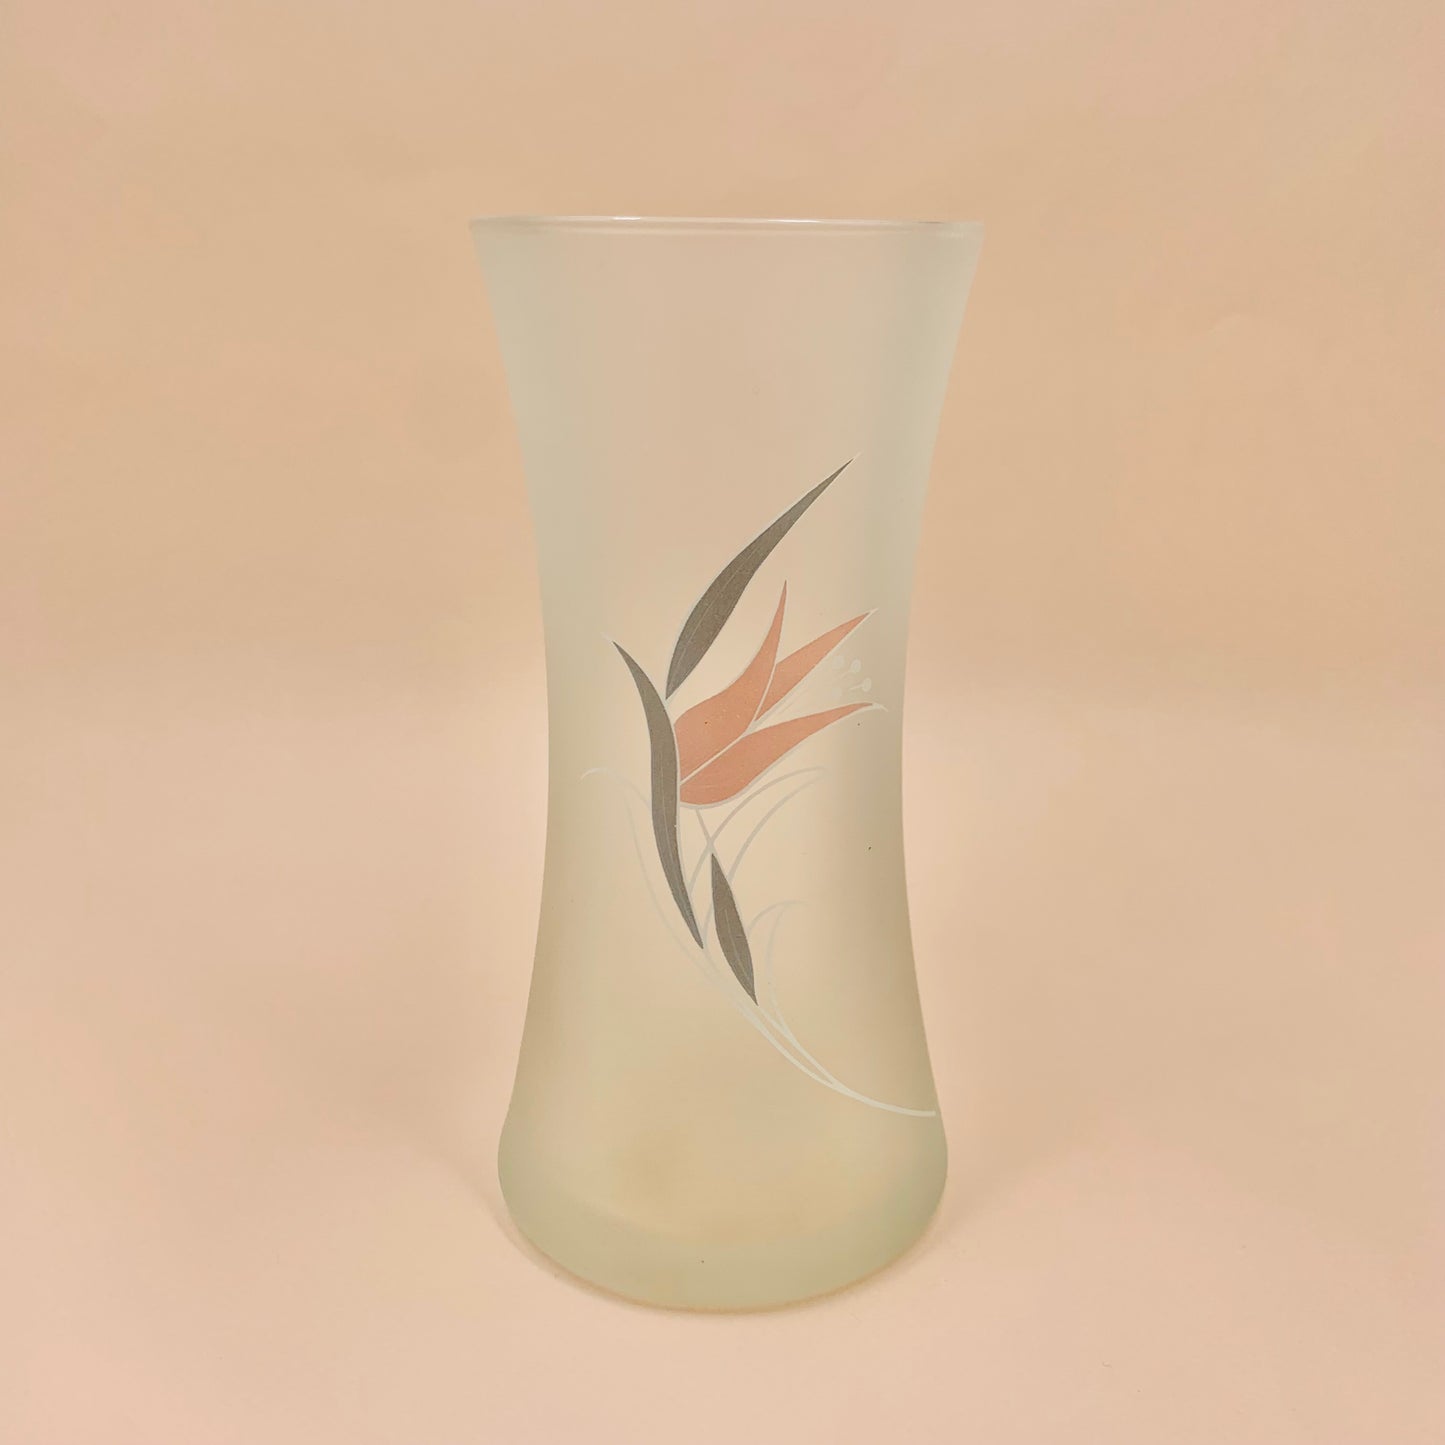 1980s satin glass vase with laminated floral decoration